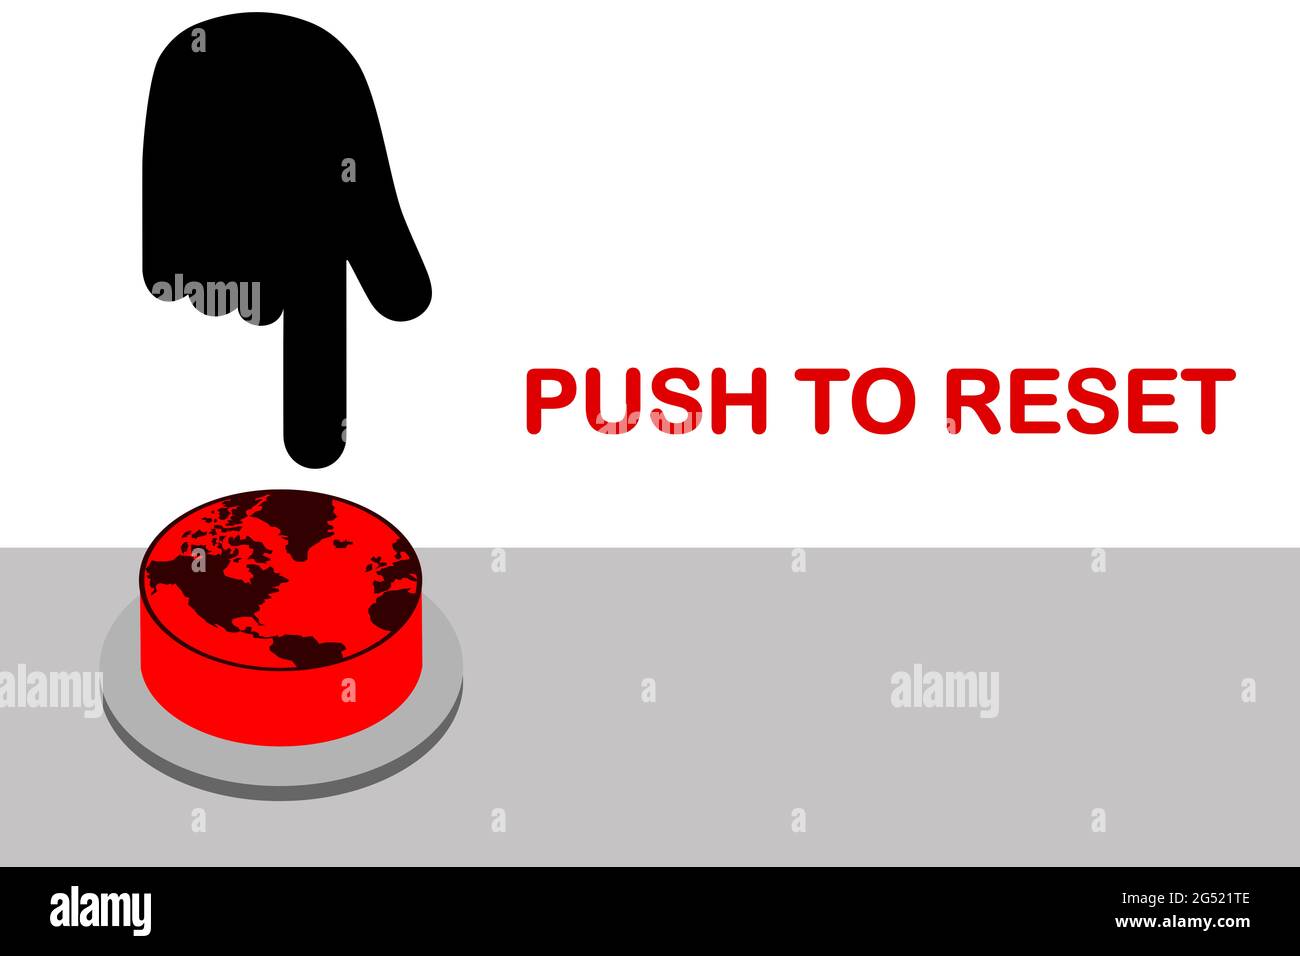 push to reset text next to hand, red button with the world on it, the great reset concept illustration Stock Photo